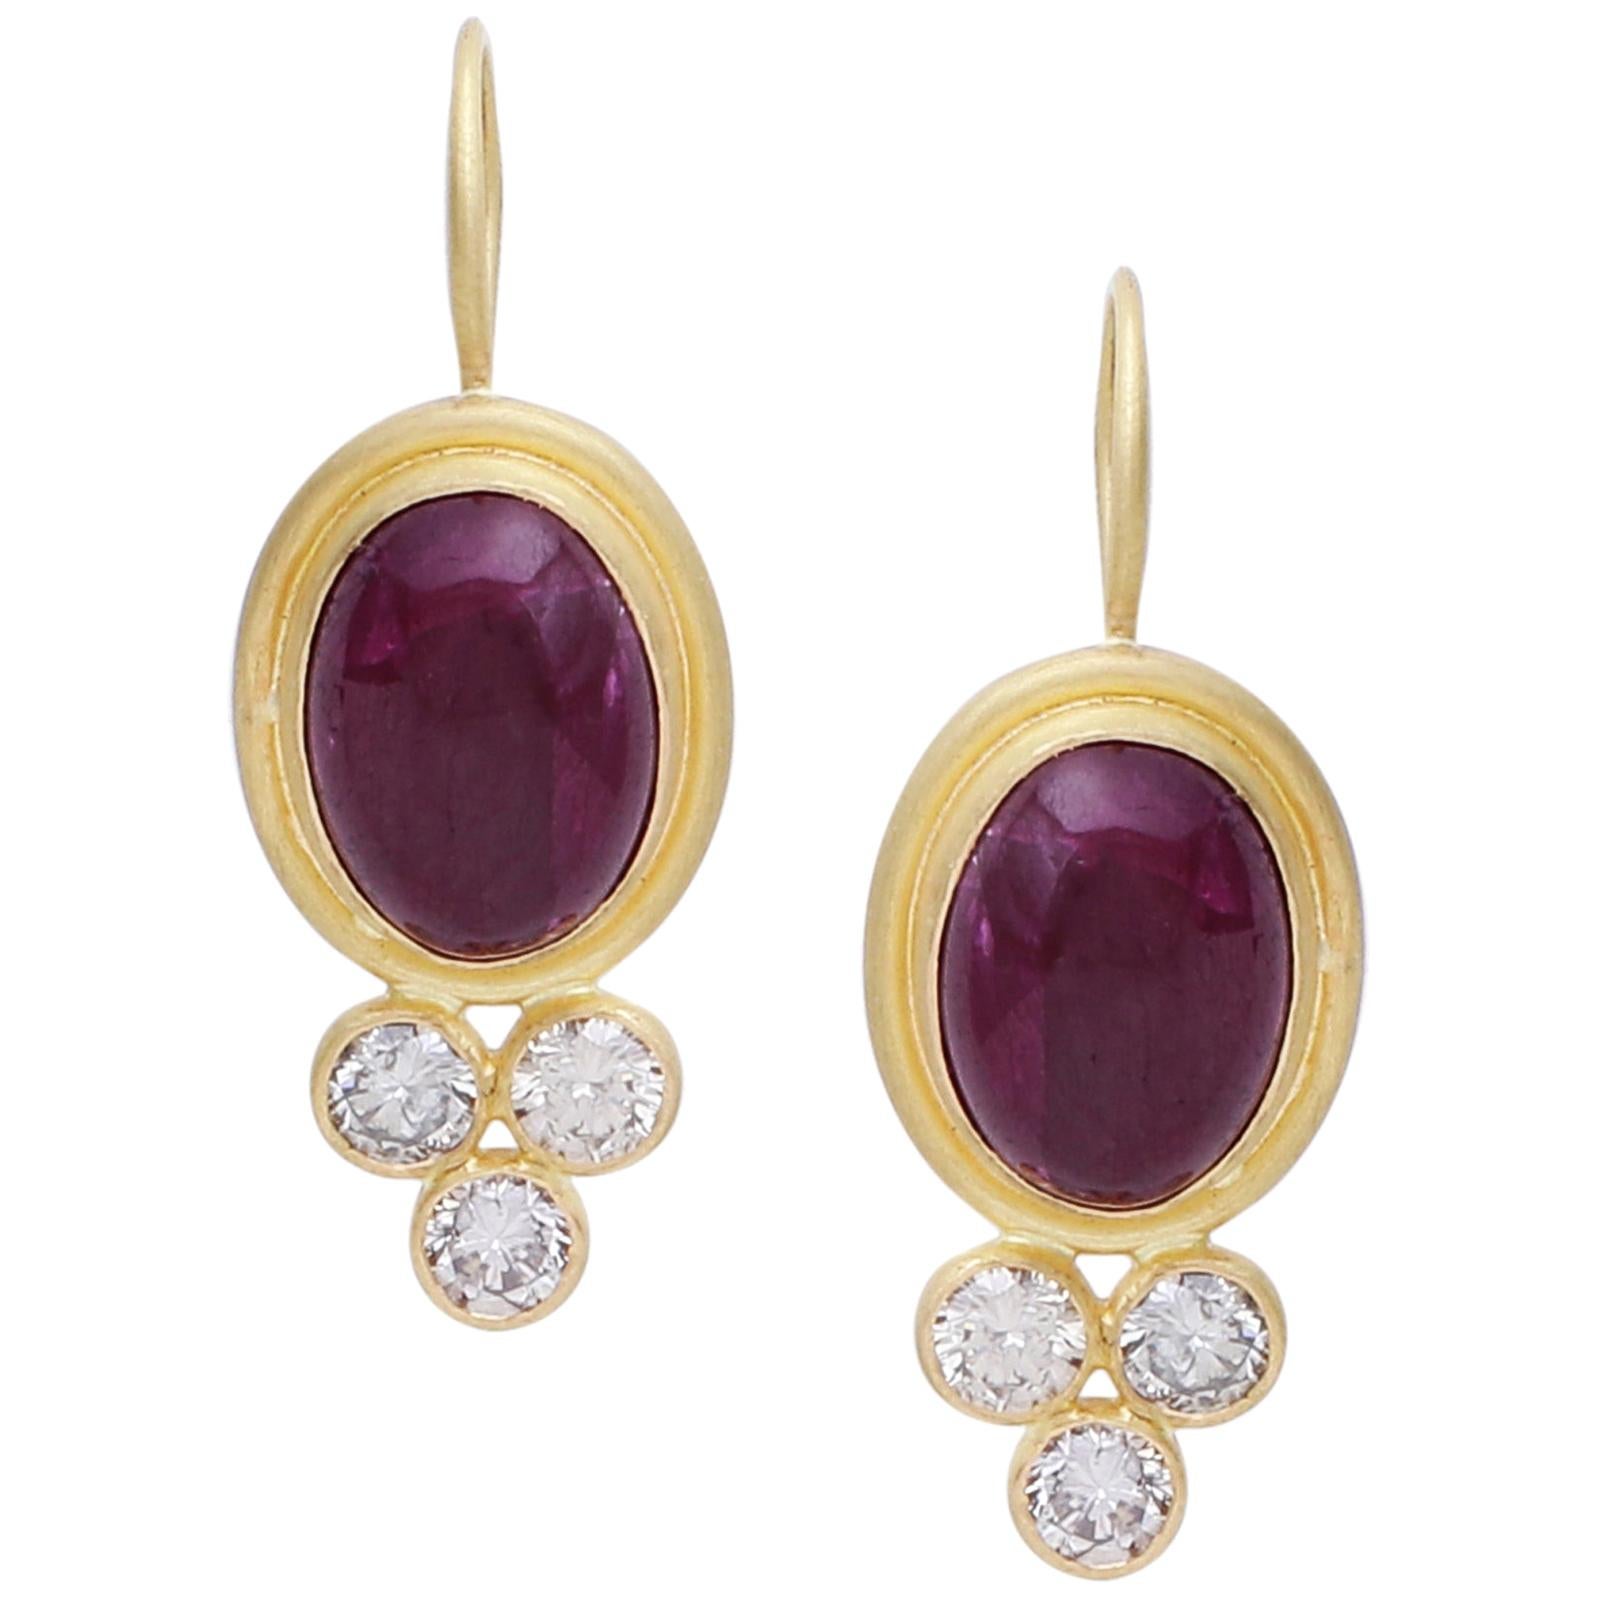 Diamond and Natural Ruby Cabochon Earring Handcrafted in 18 Karat Yellow Gold